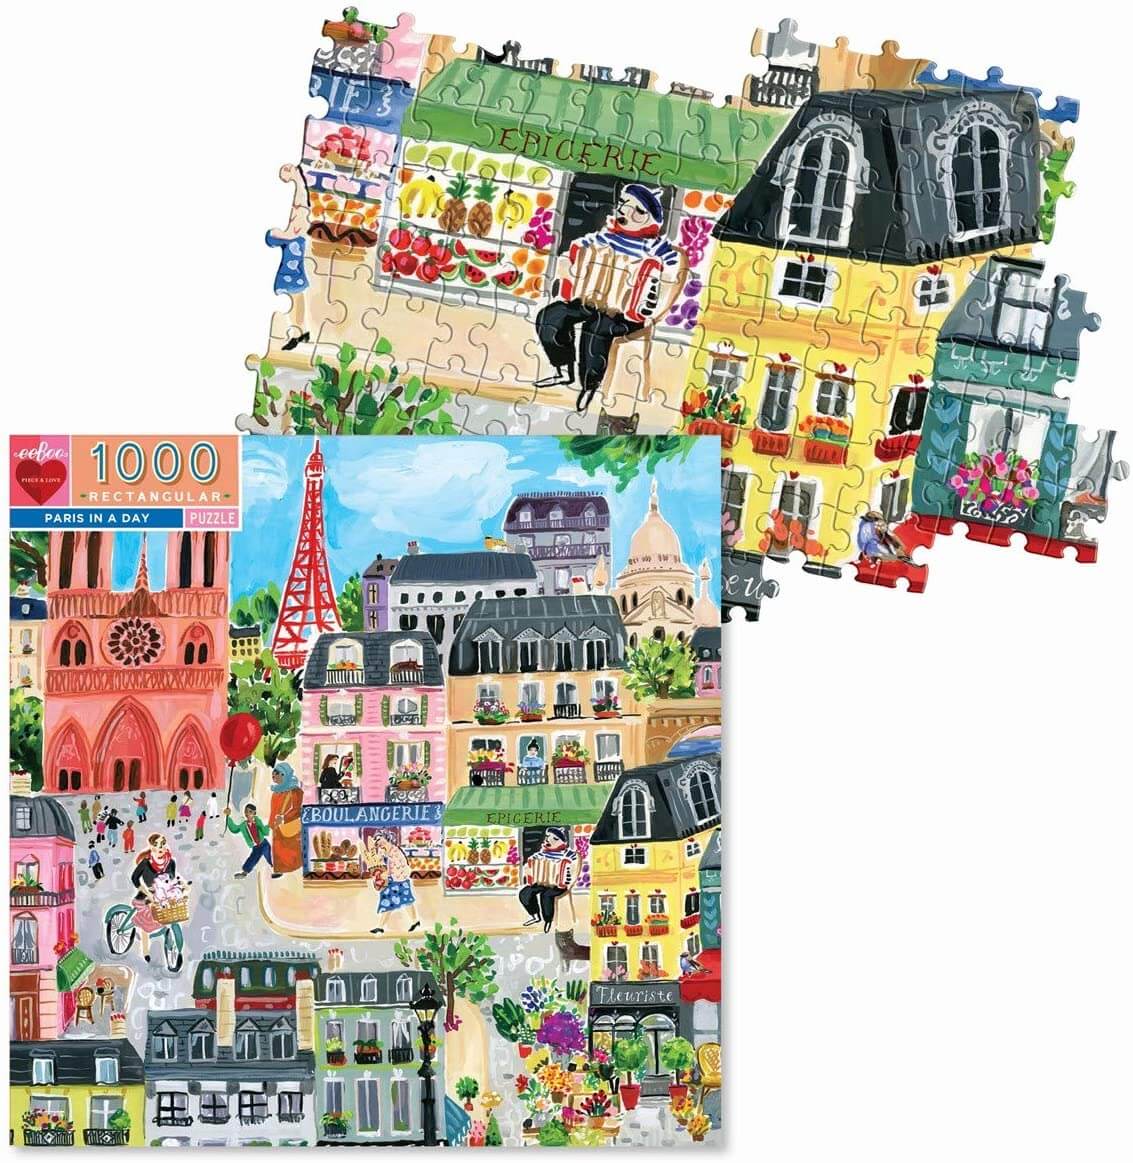 eeBoo's Piece and Love Paris in a Day 1000 Piece Rectangular Adult Jigsaw Puzzle | Puzzle detail